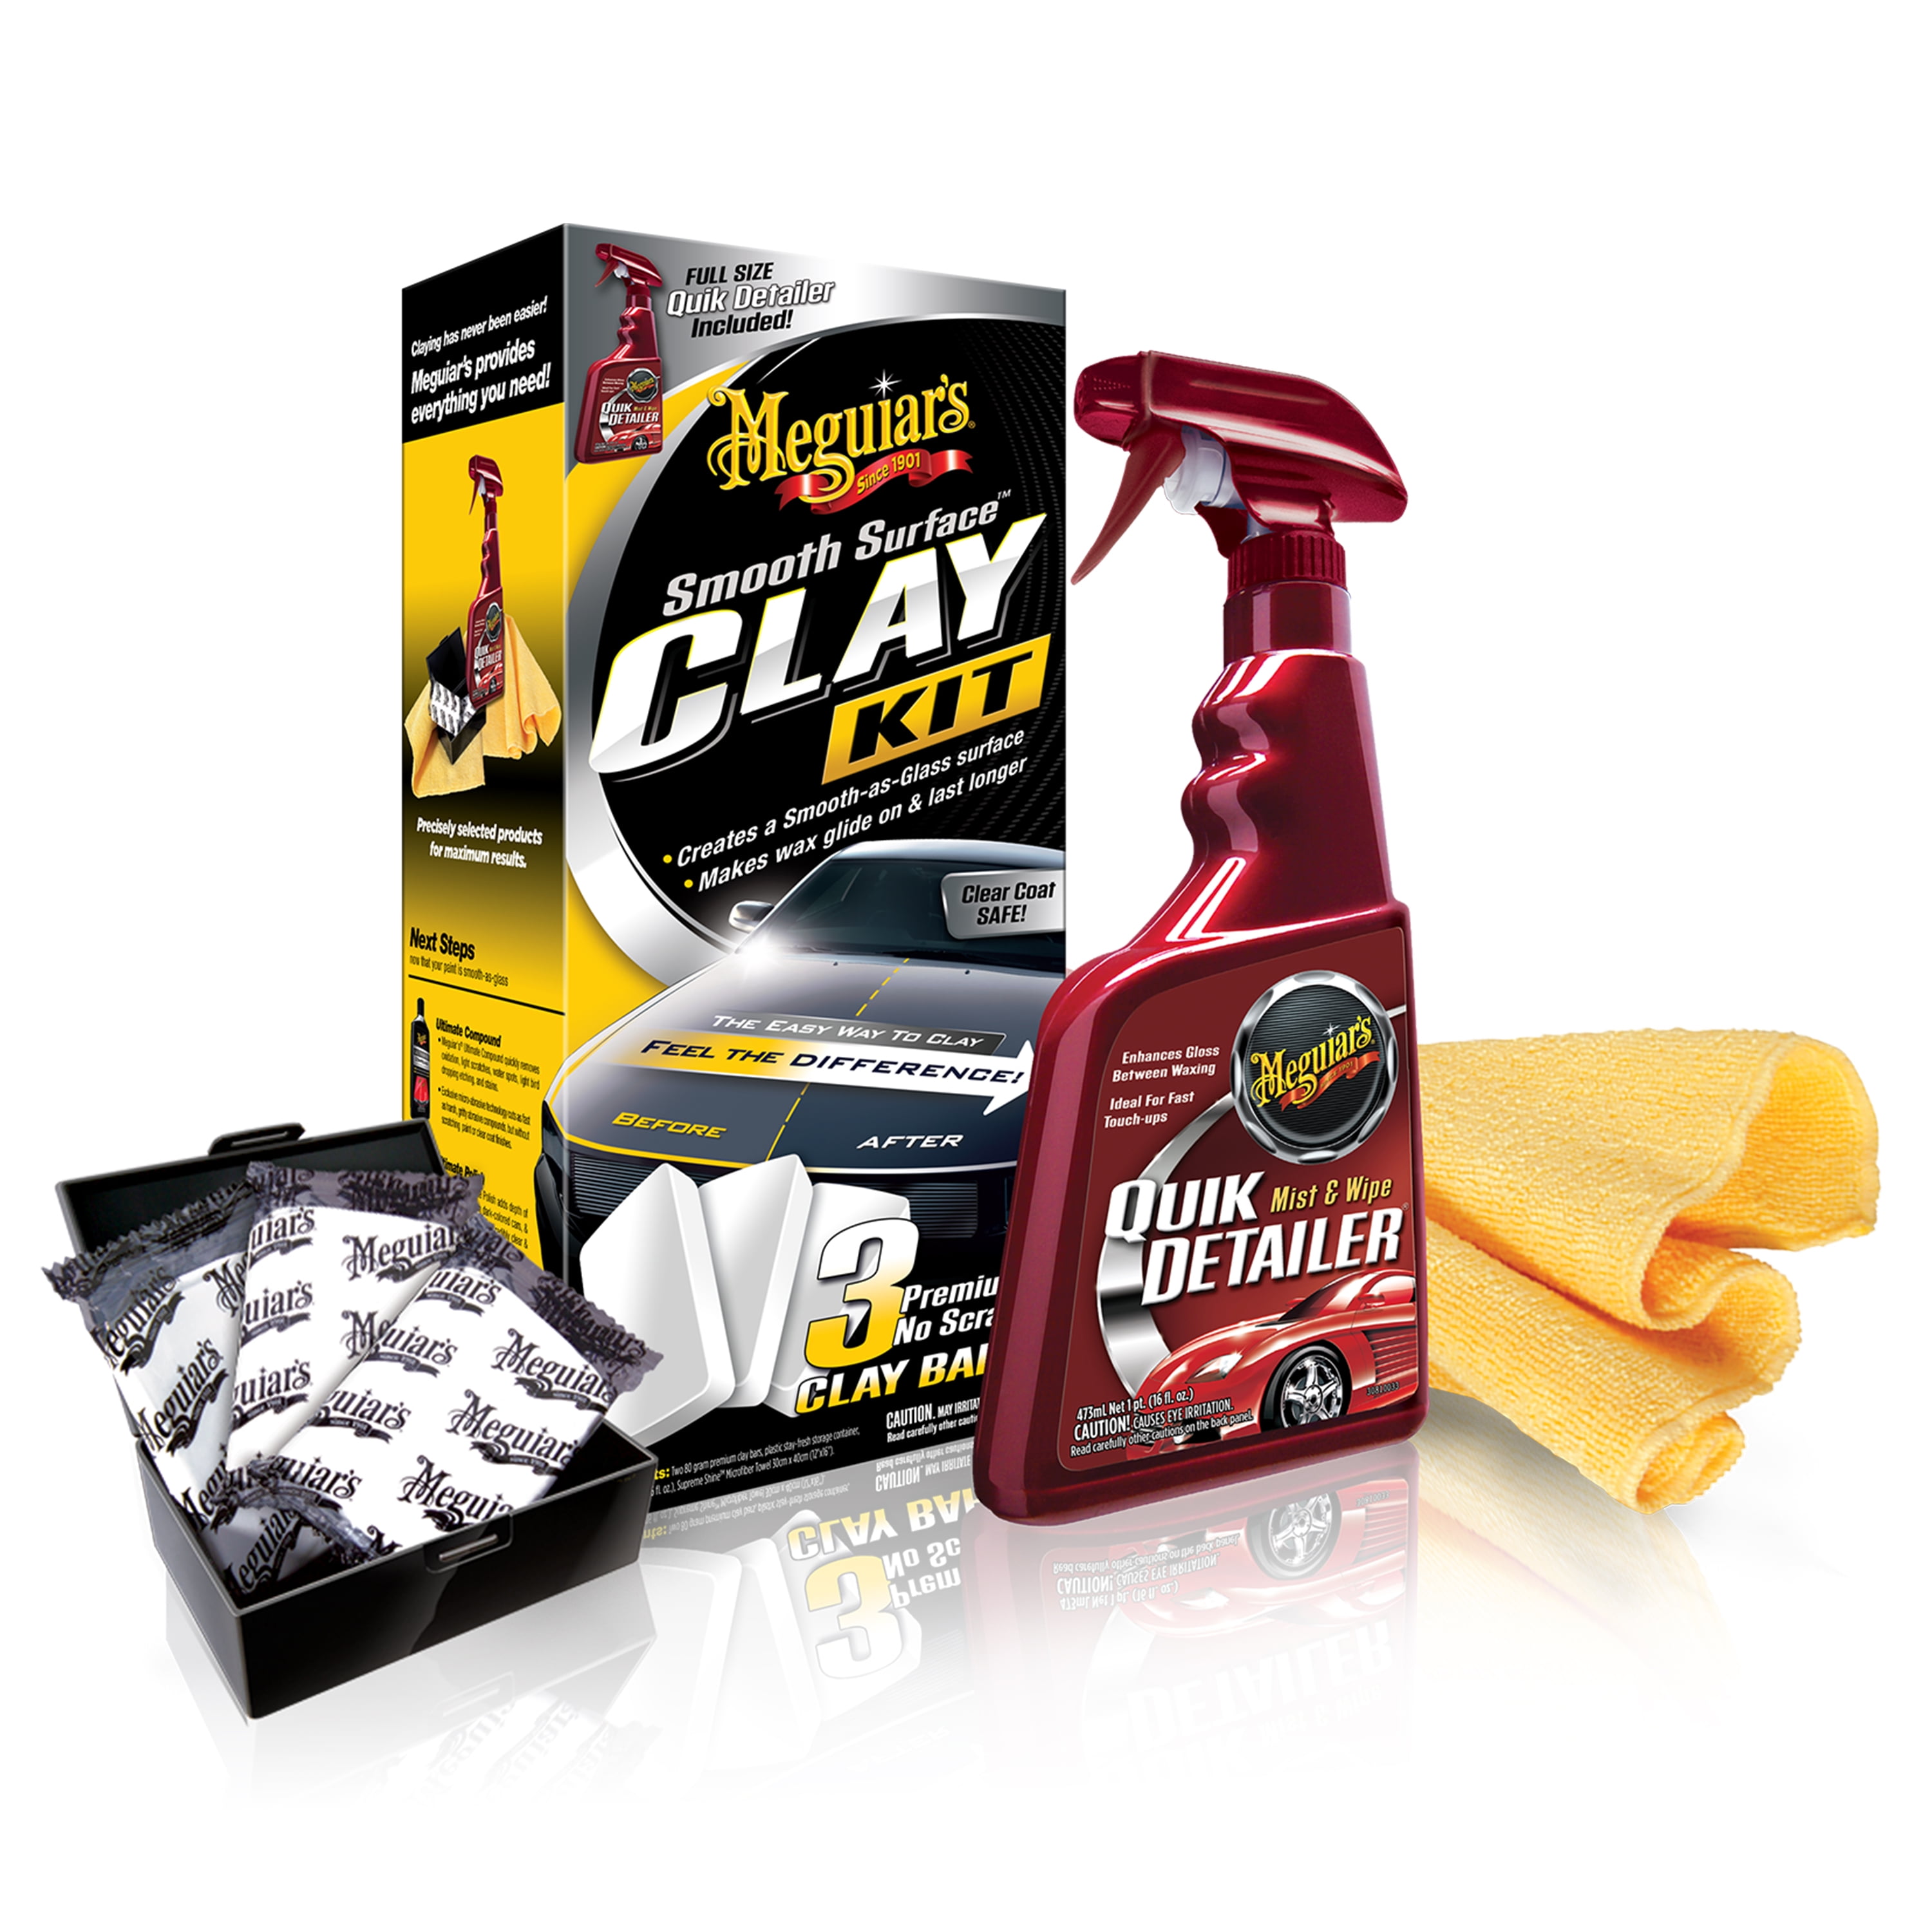 Meguiars Smooth Surface Clay Bar Replacement - náhradní kostka claye